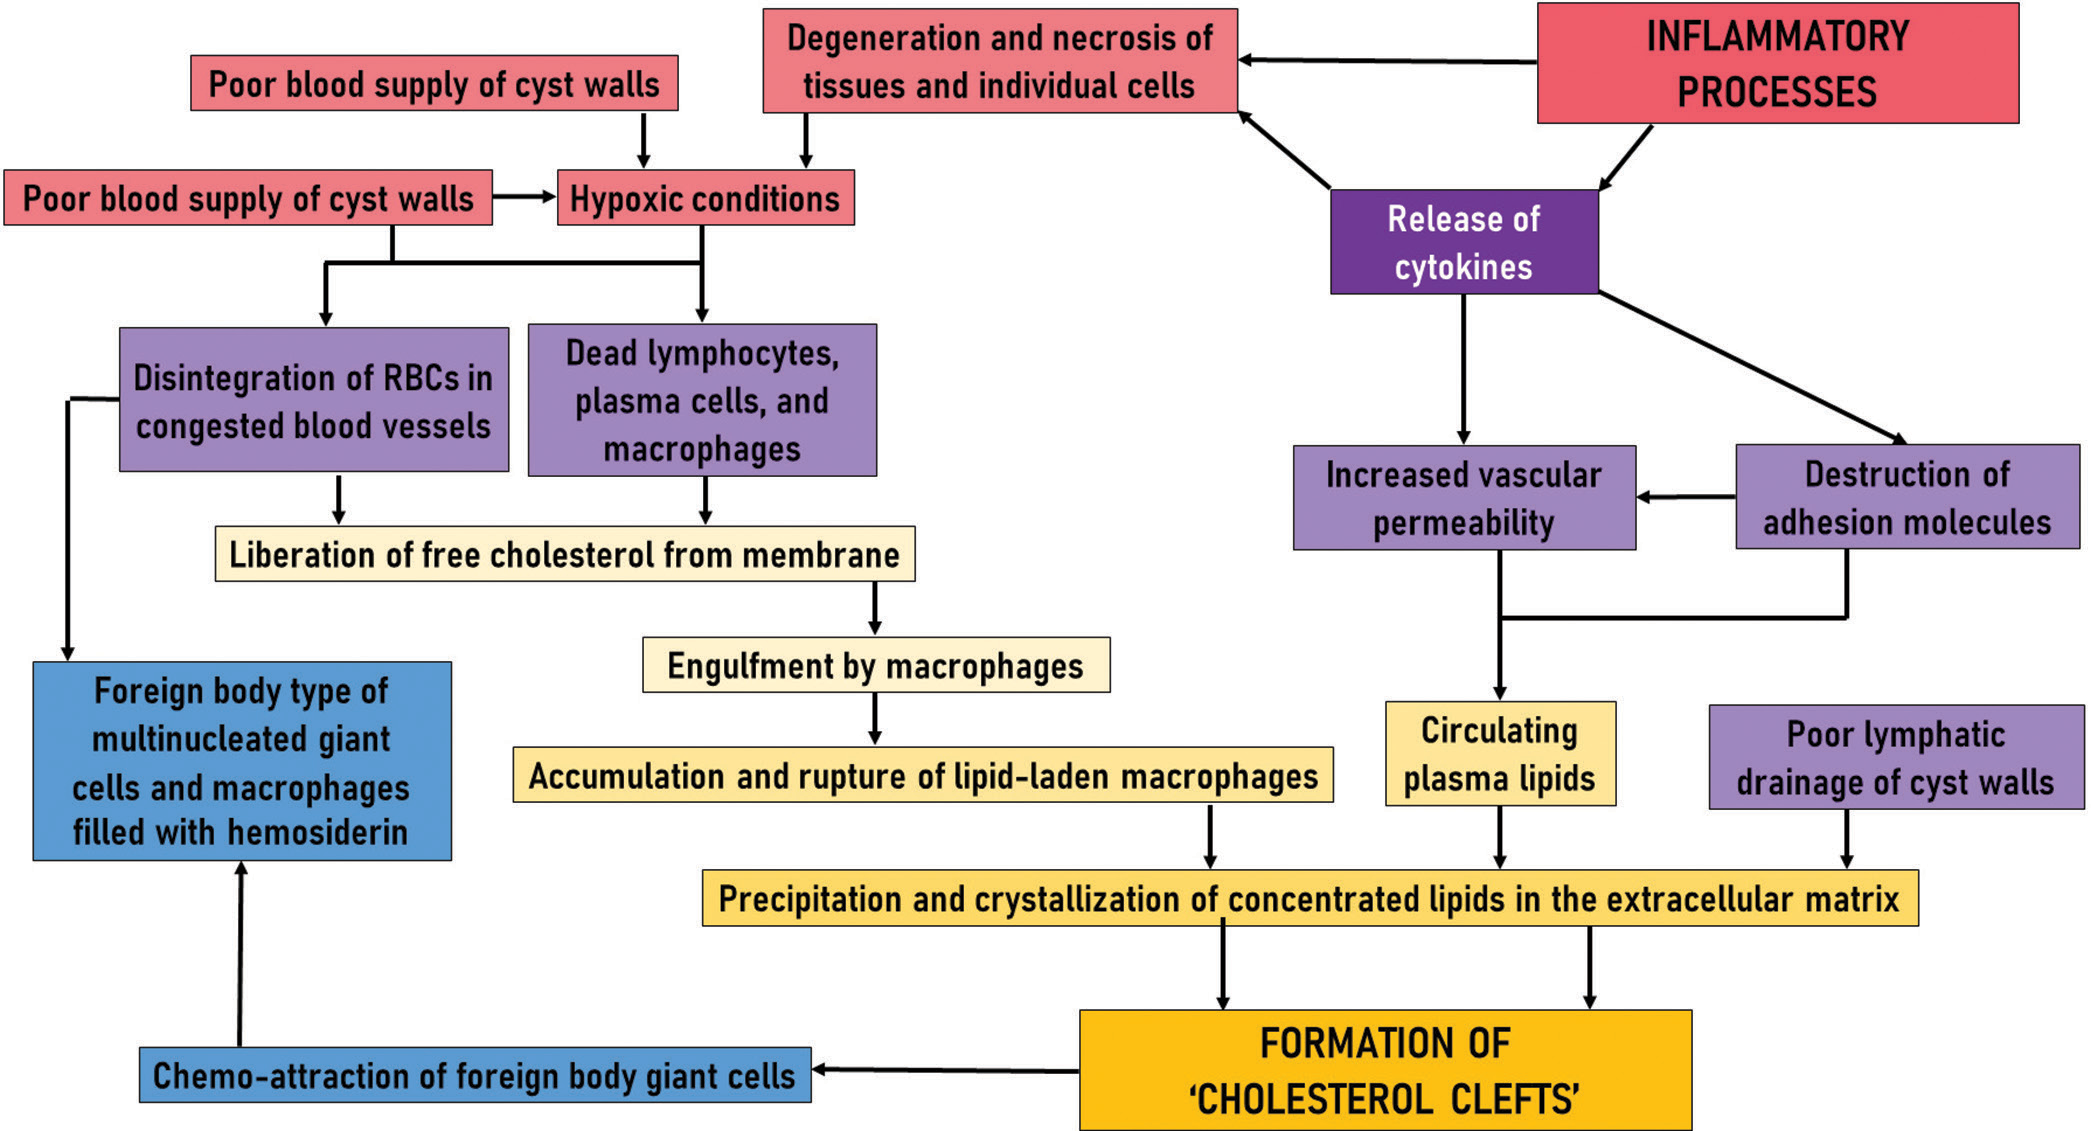 Cascade of events involved in the formation of cholesterol clefts in odontogenic cysts.